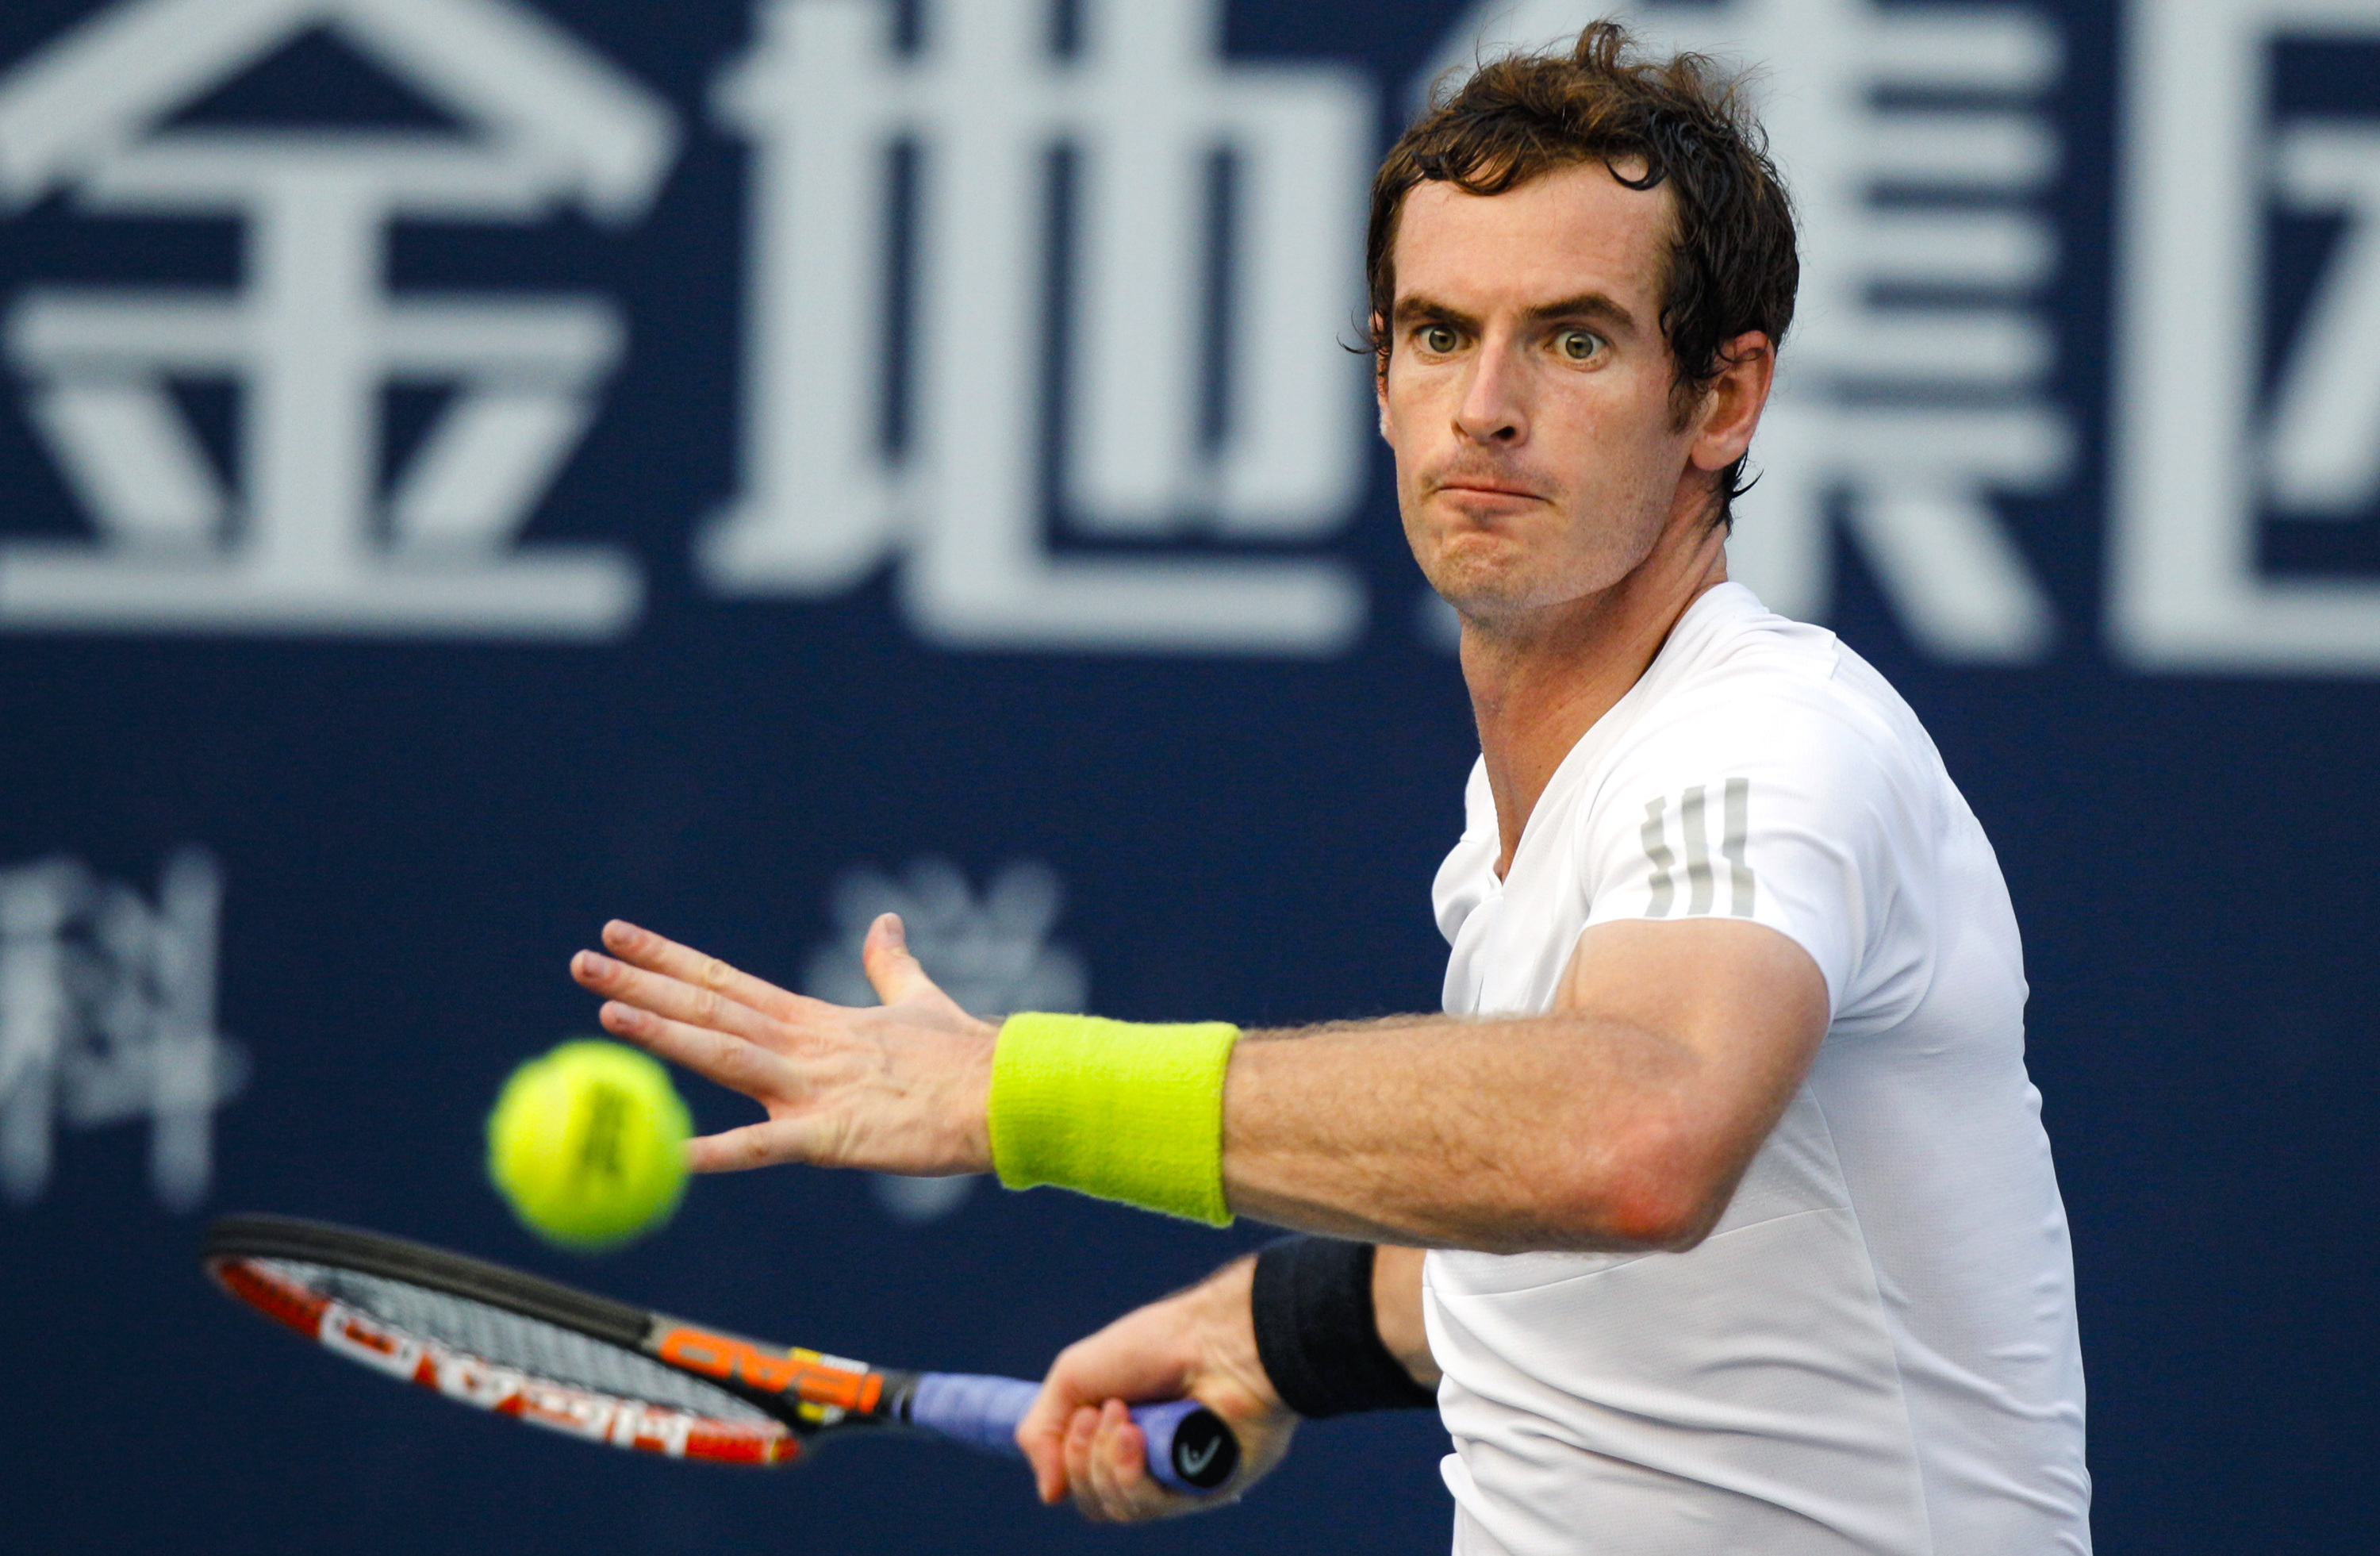 Murray of Britain hits a return to Robredo of Spain during their men's singles final match at the Shenzhen Open tennis tournament in Shenzhen